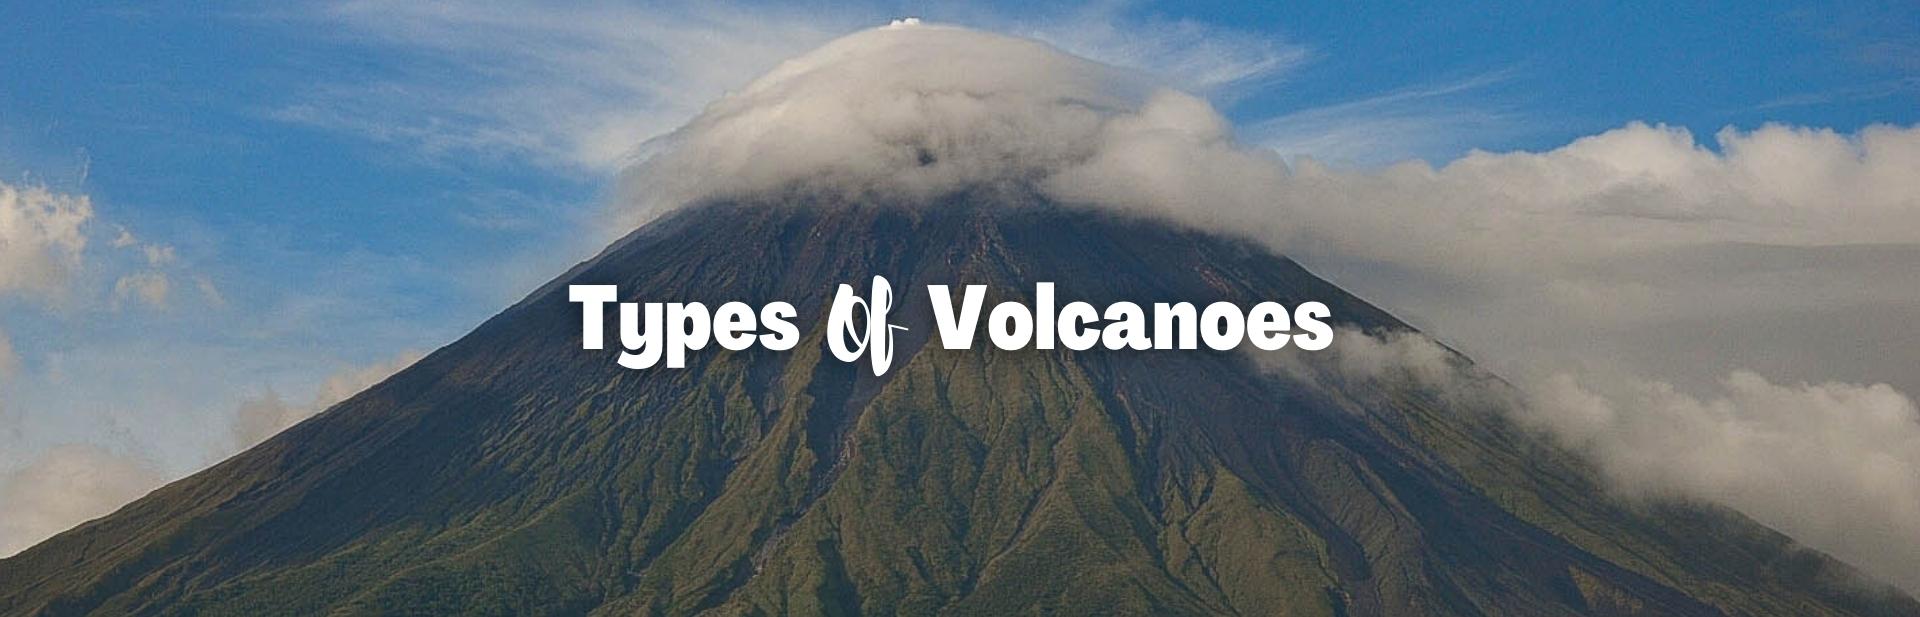 All About The 4 Types of Volcanoes+ Formation, Eruption, and Facts